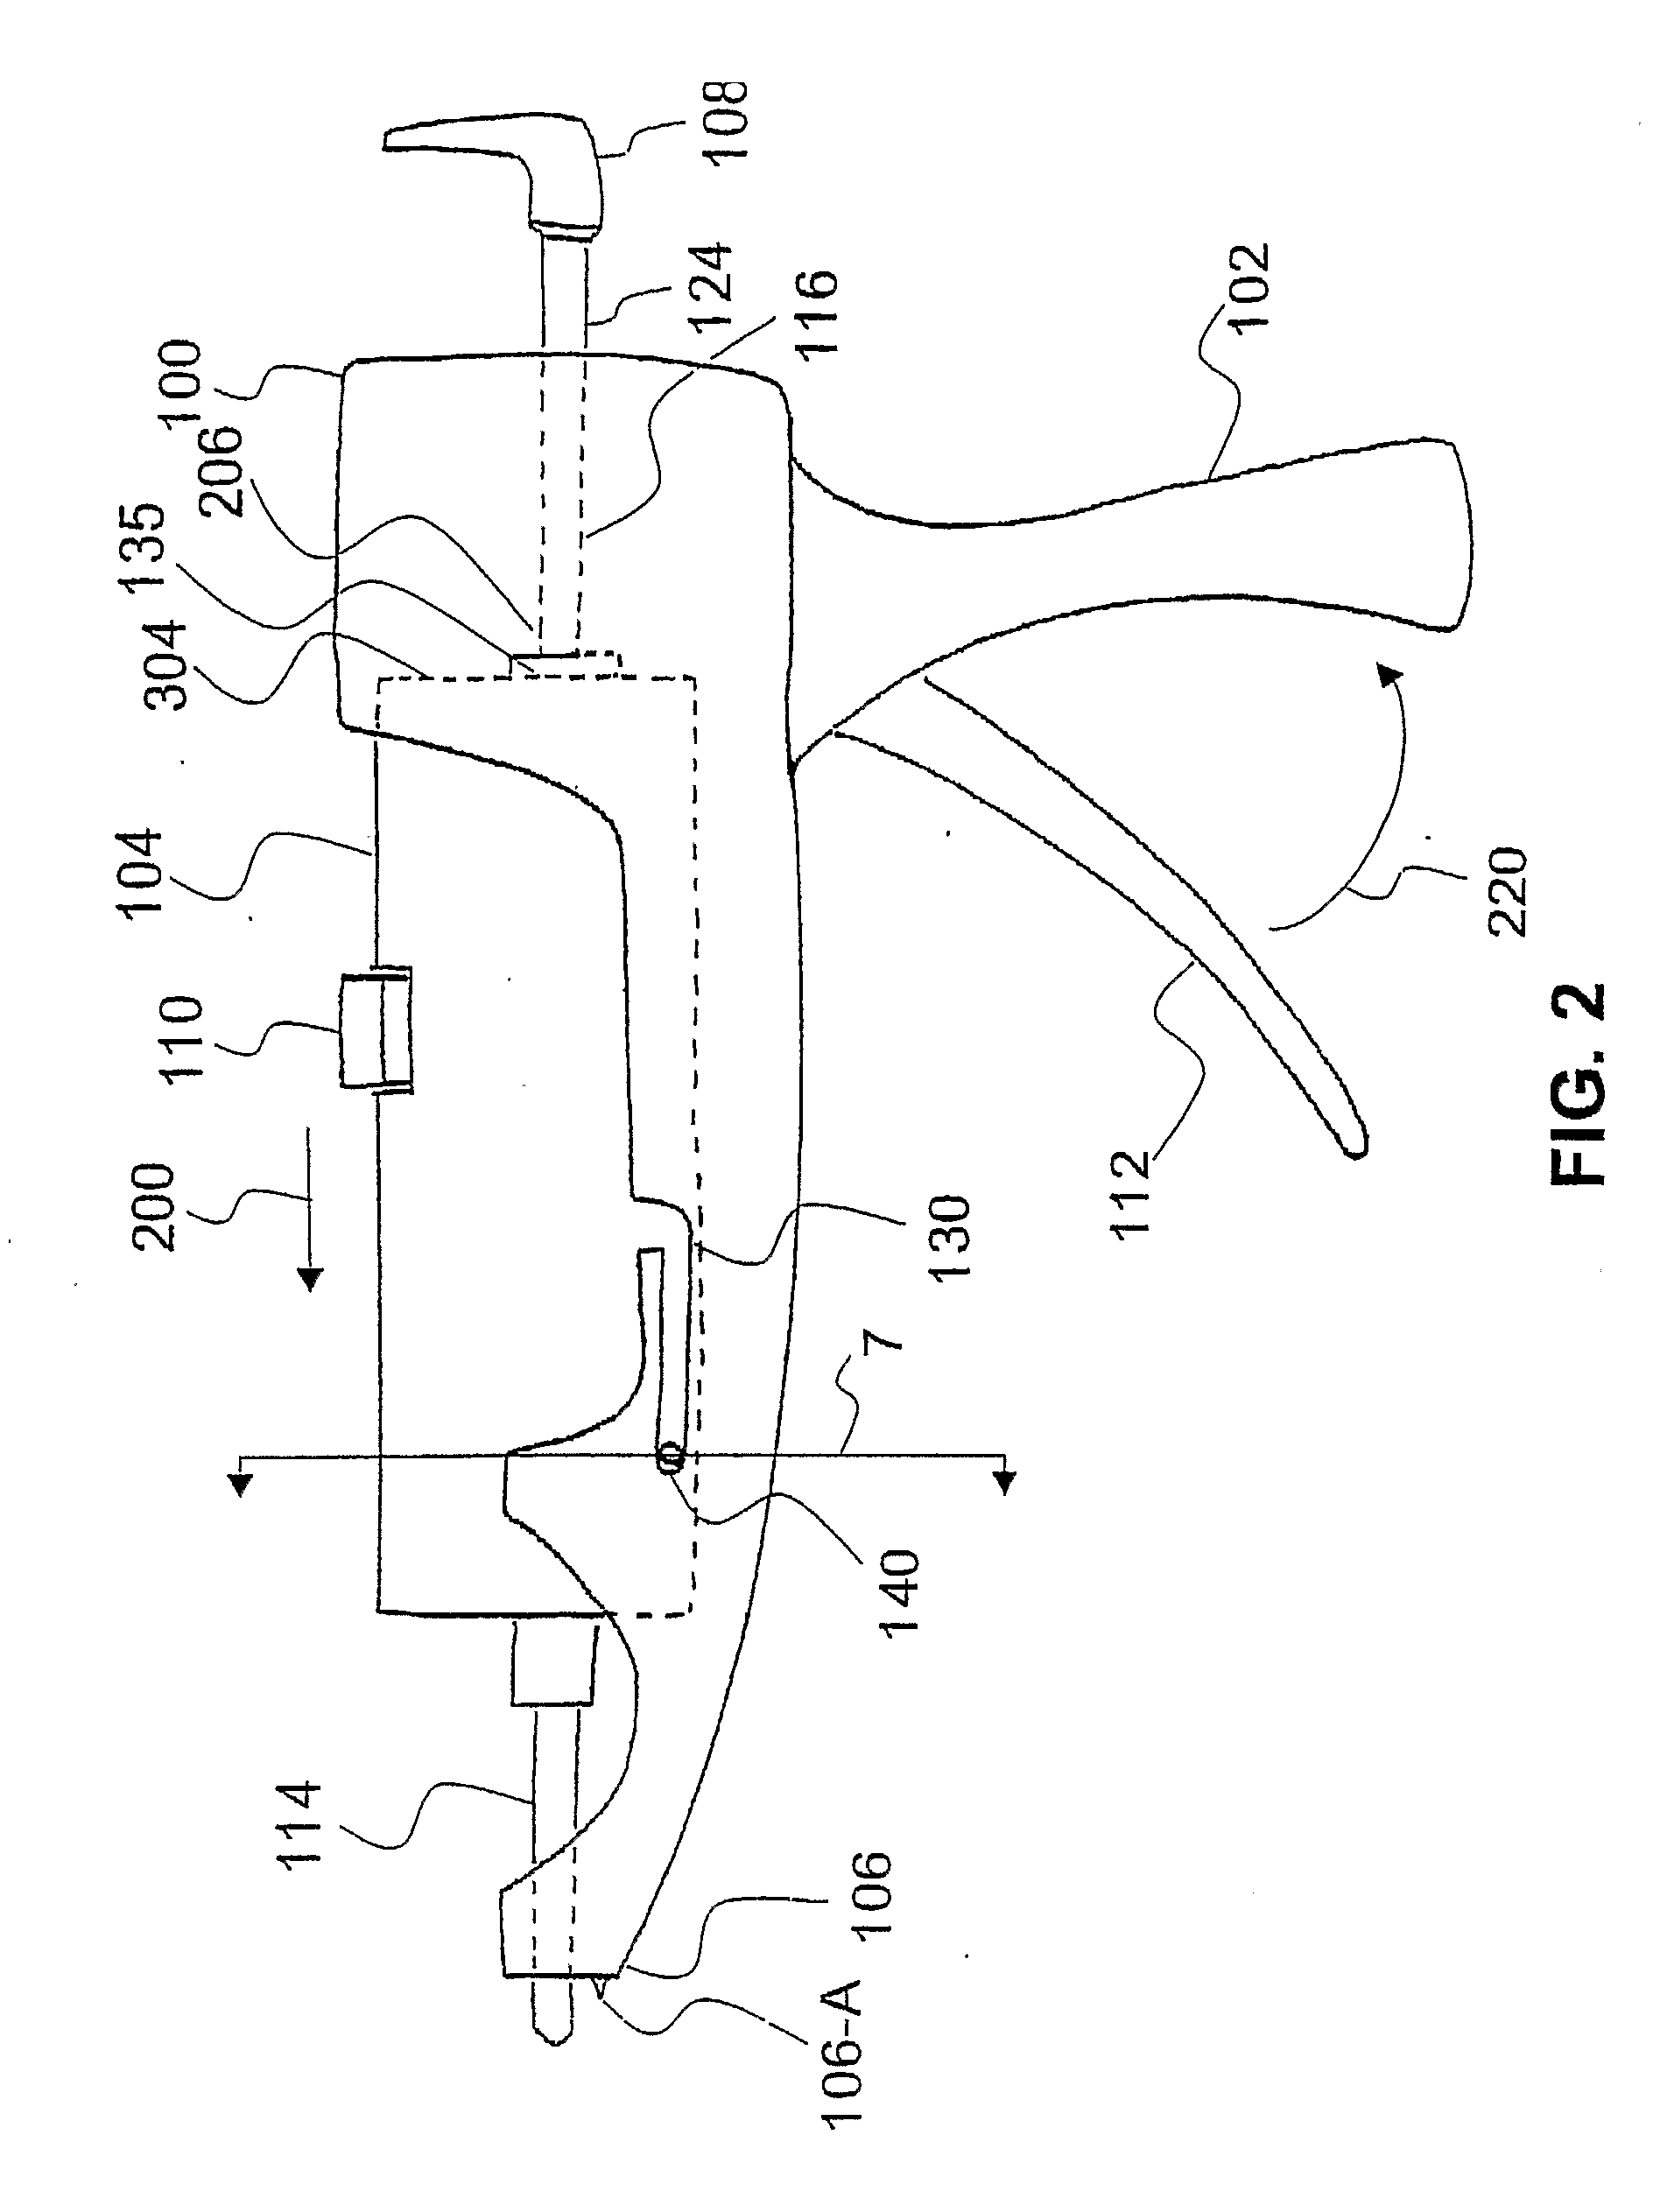 Apparatus and method thereof for drilling holes in discrete controlled increments